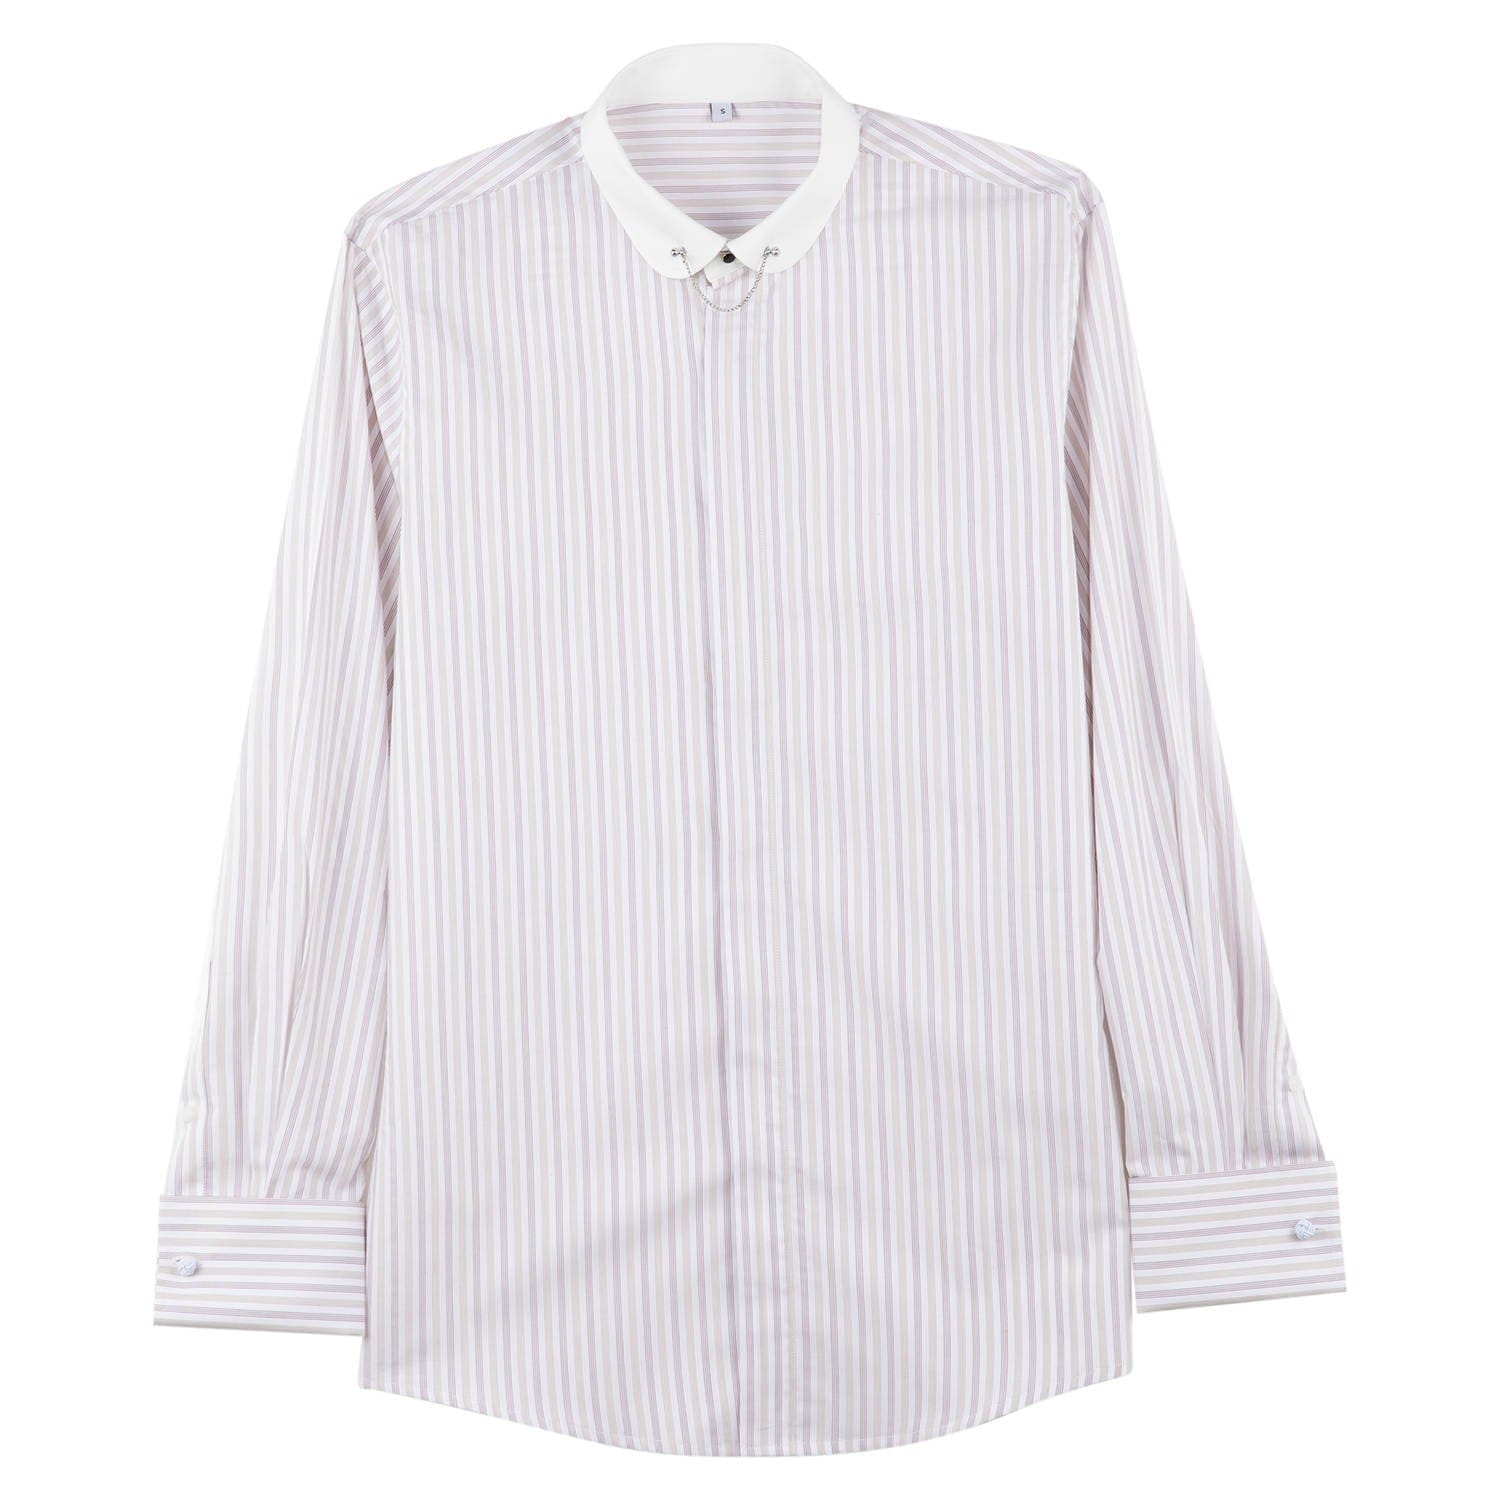 full front view of the beige pinstripe round collar doublecuff shirt showing cufflinks on sleeves